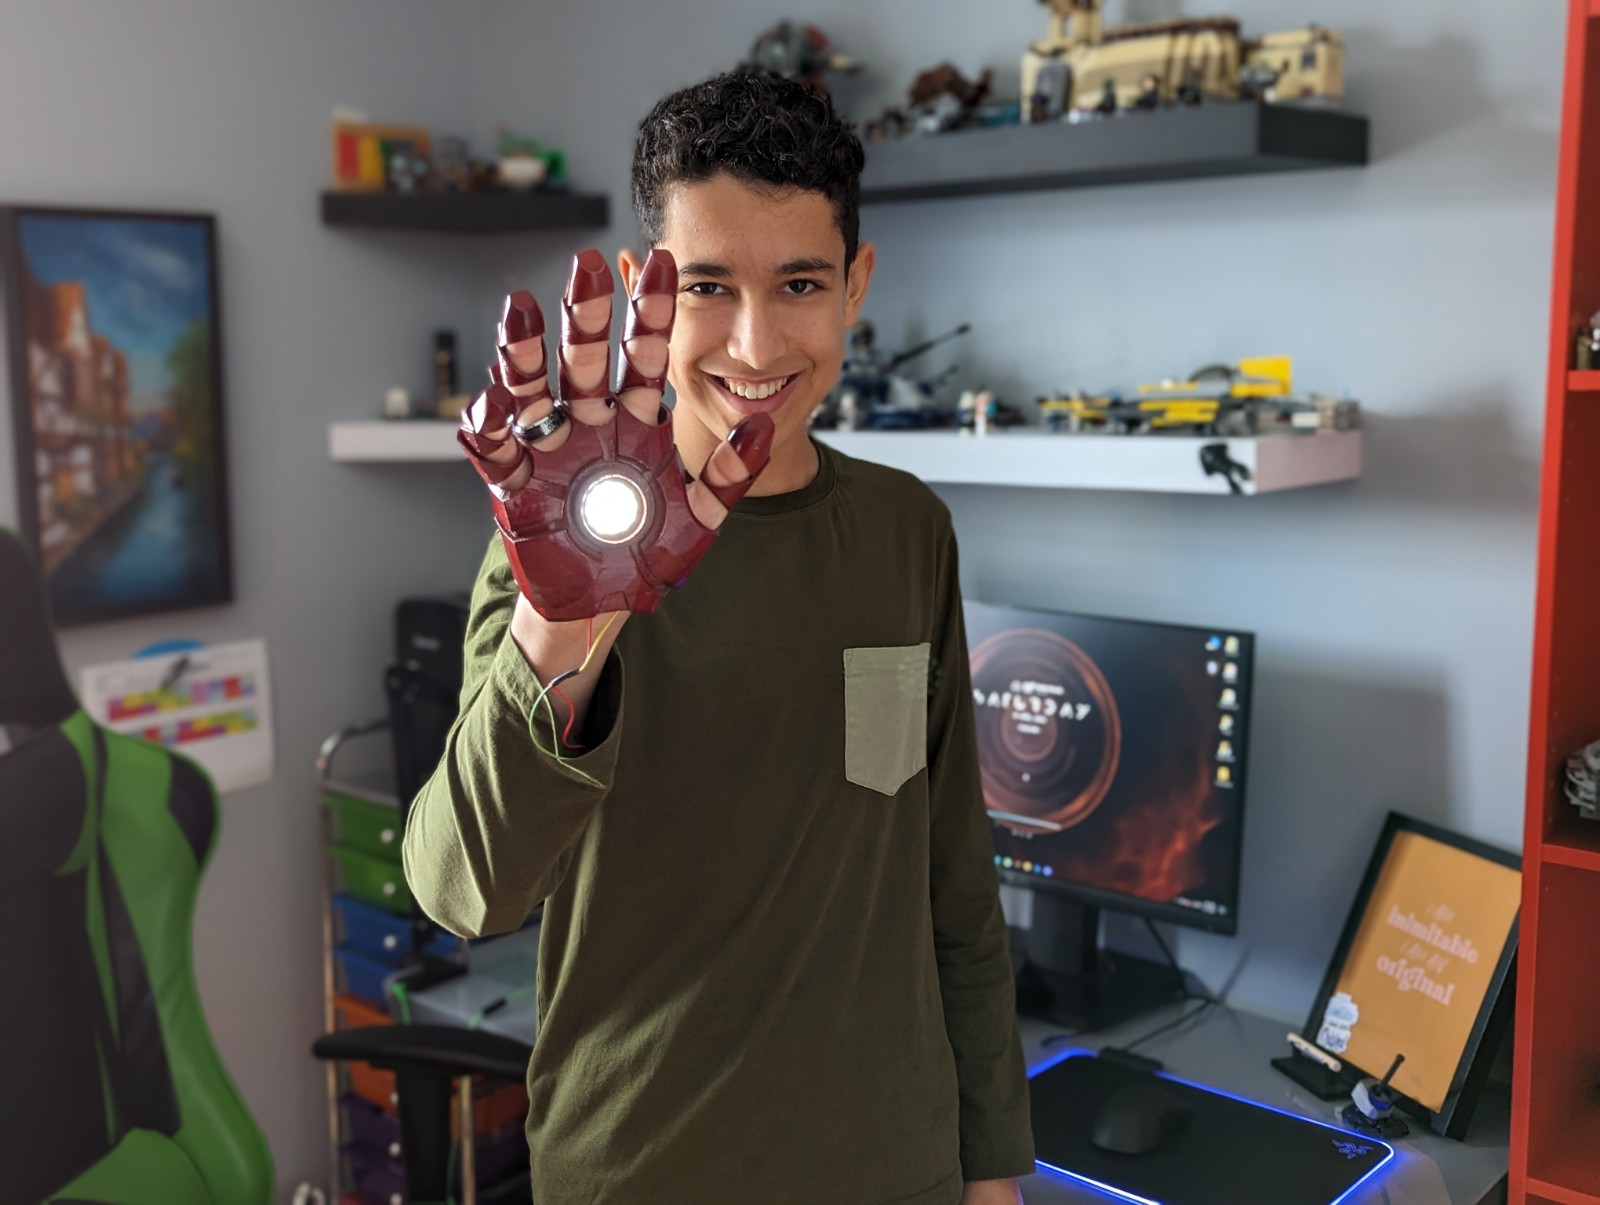 Local 15-year-old who 3D printed and coded Iron Man robotic hand heading to Canada-Wide science fair